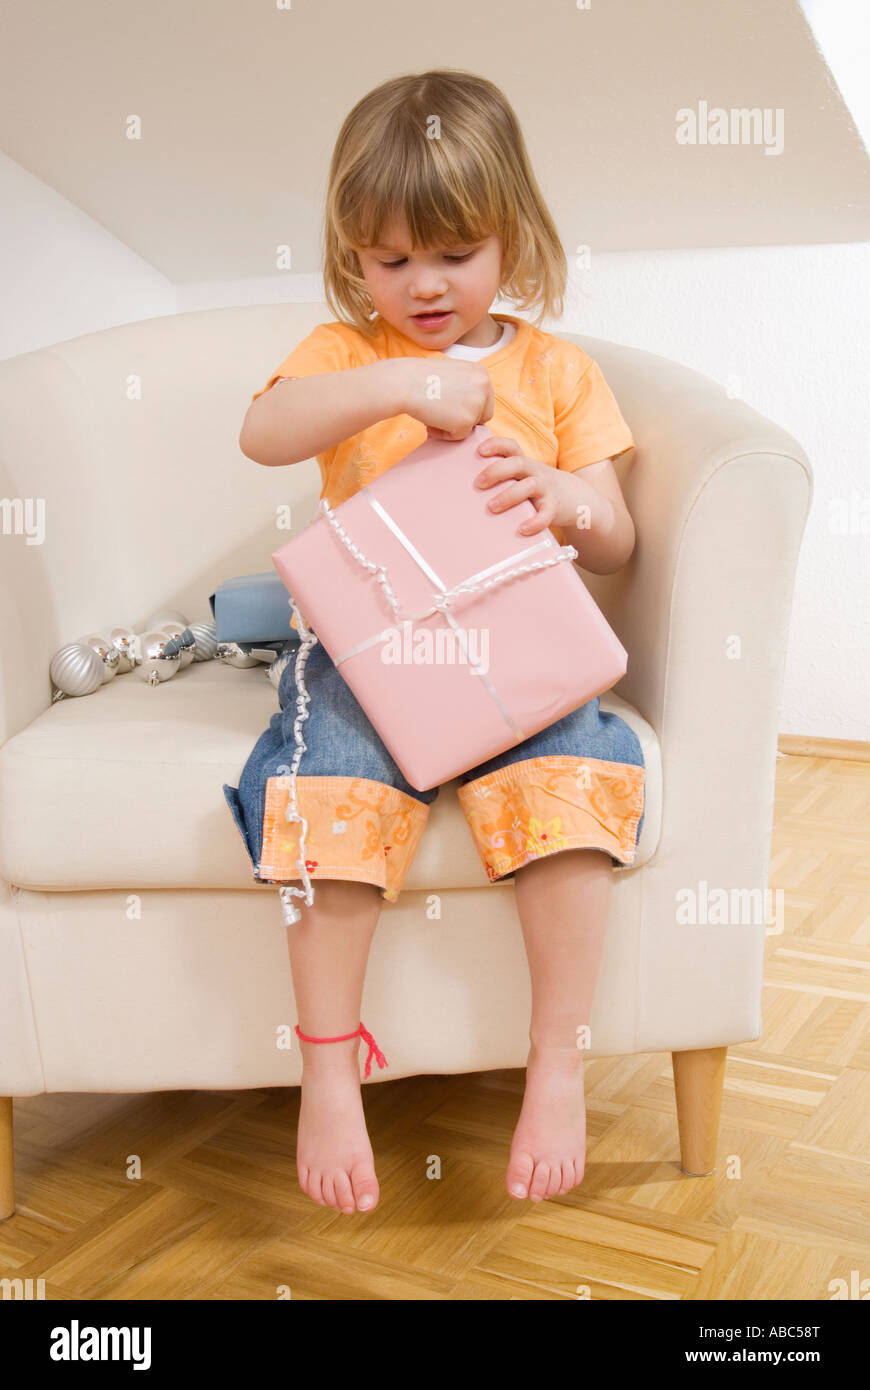 Little girl sitting on chair unwrapping christmas present Banque D'Images